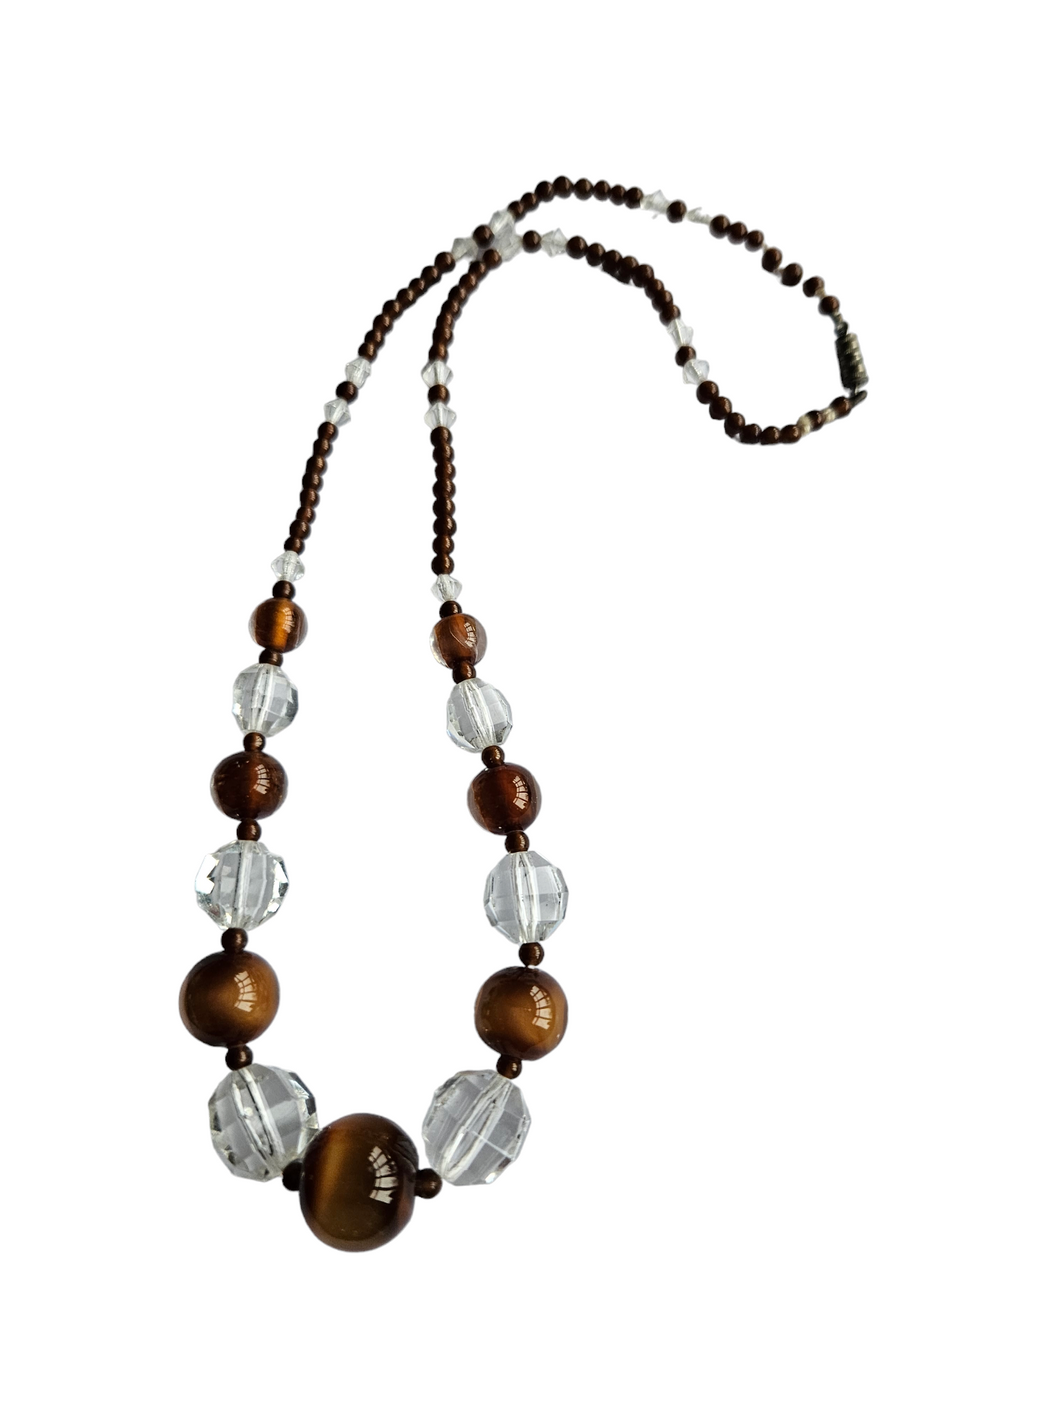 1930s Deco Brown Satin and Clear Glass Necklace